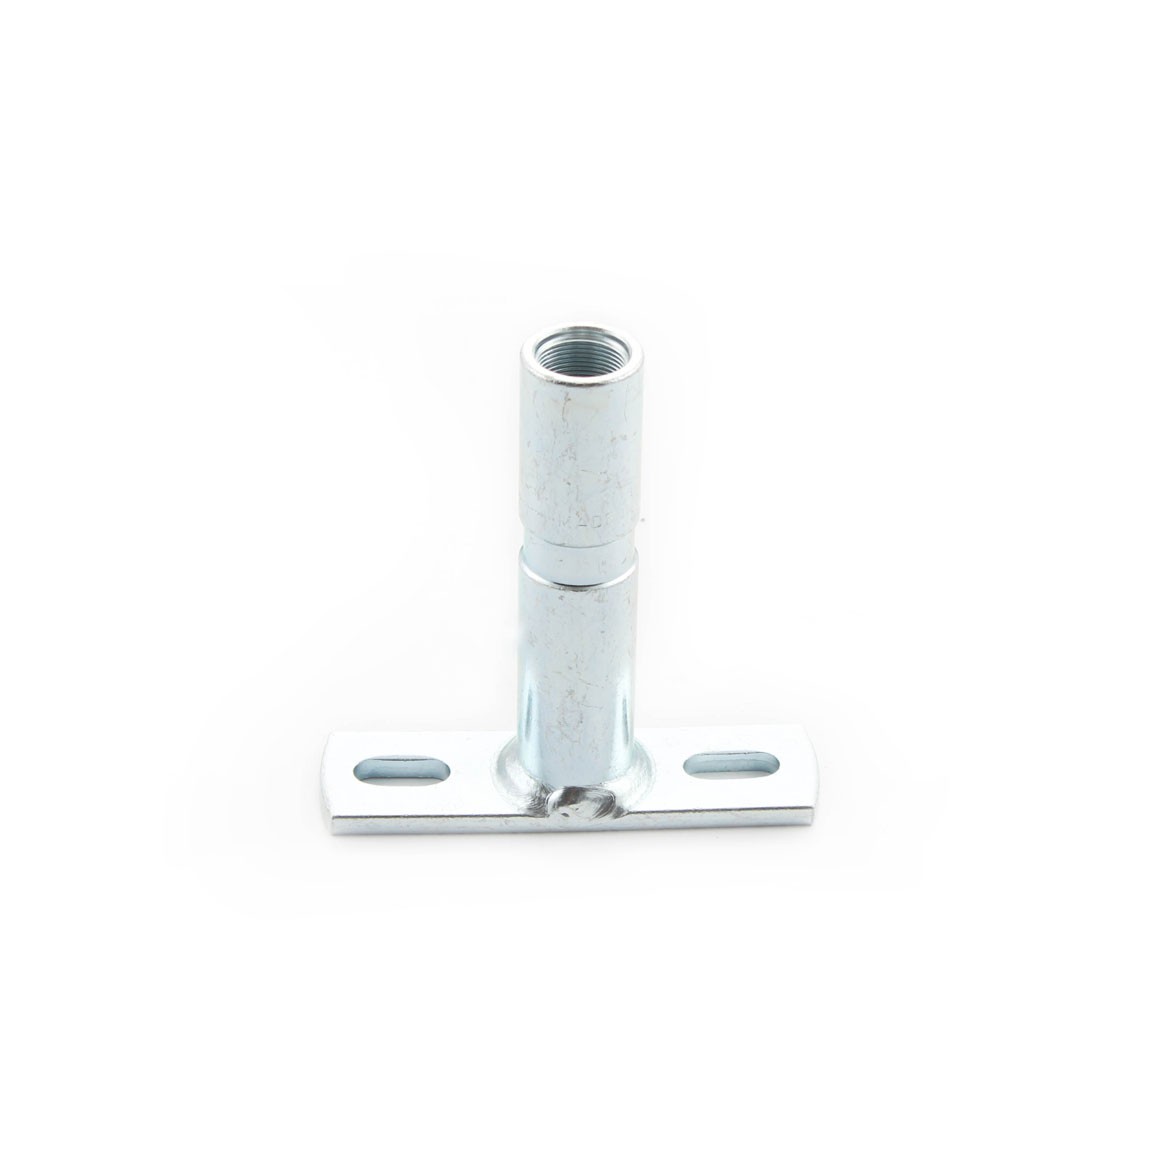 HELLA 8HG 006 294-011 Holder with cap 